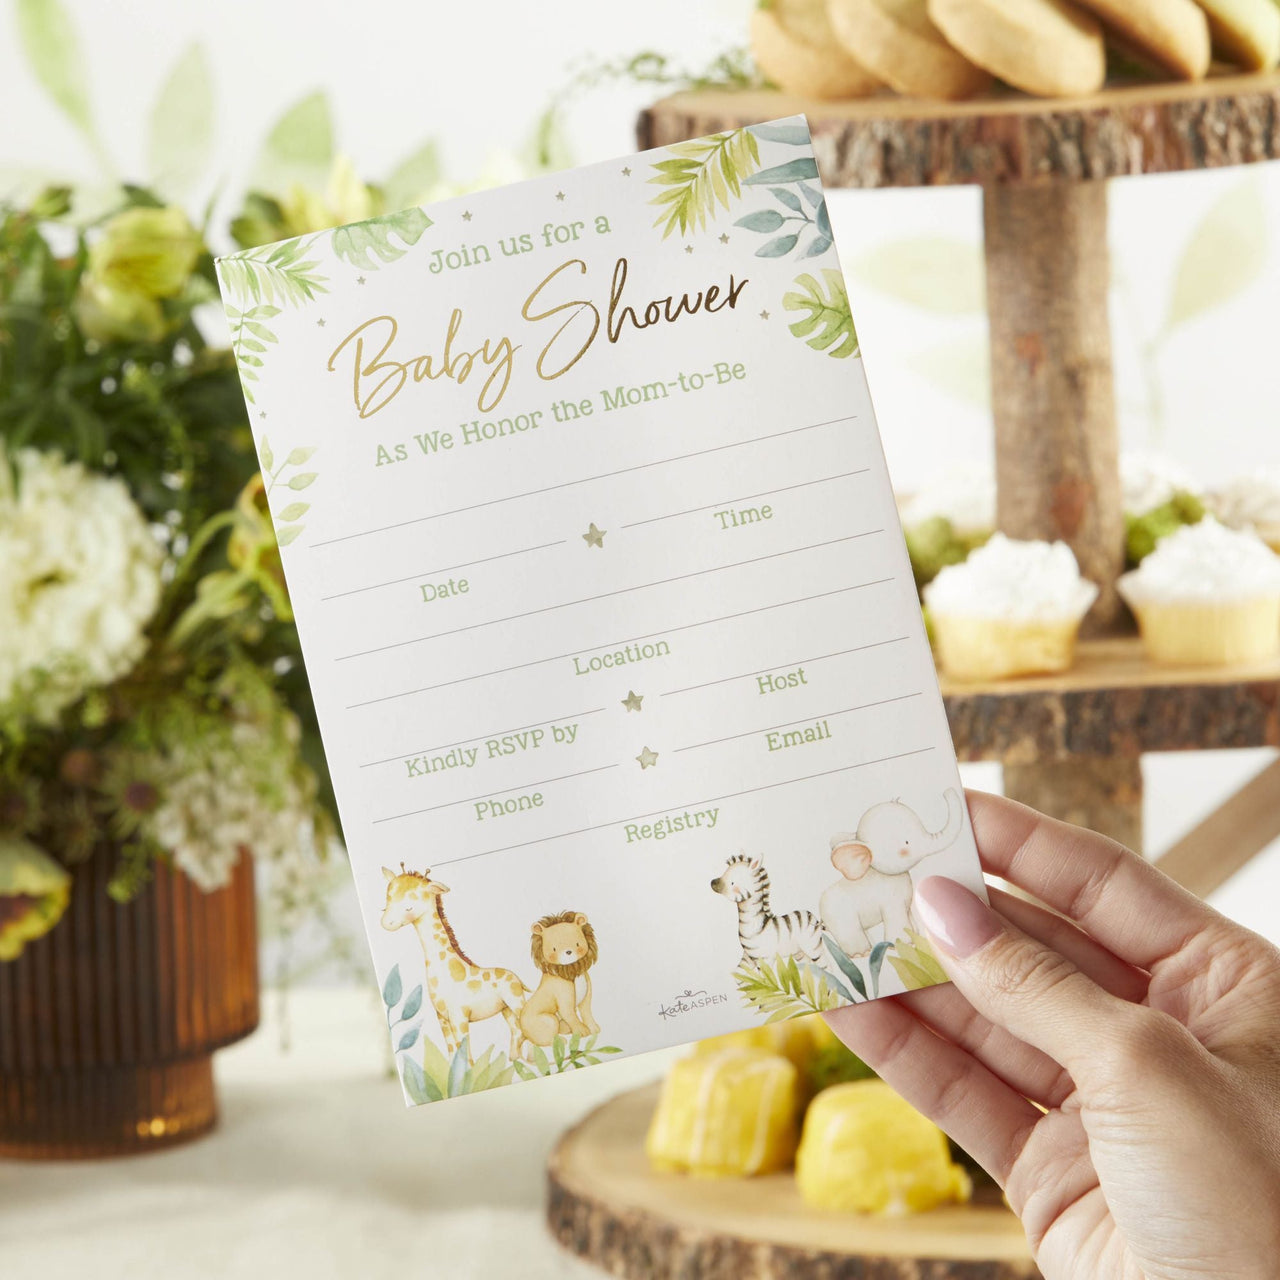 How to Host a Wedding or Baby Shower